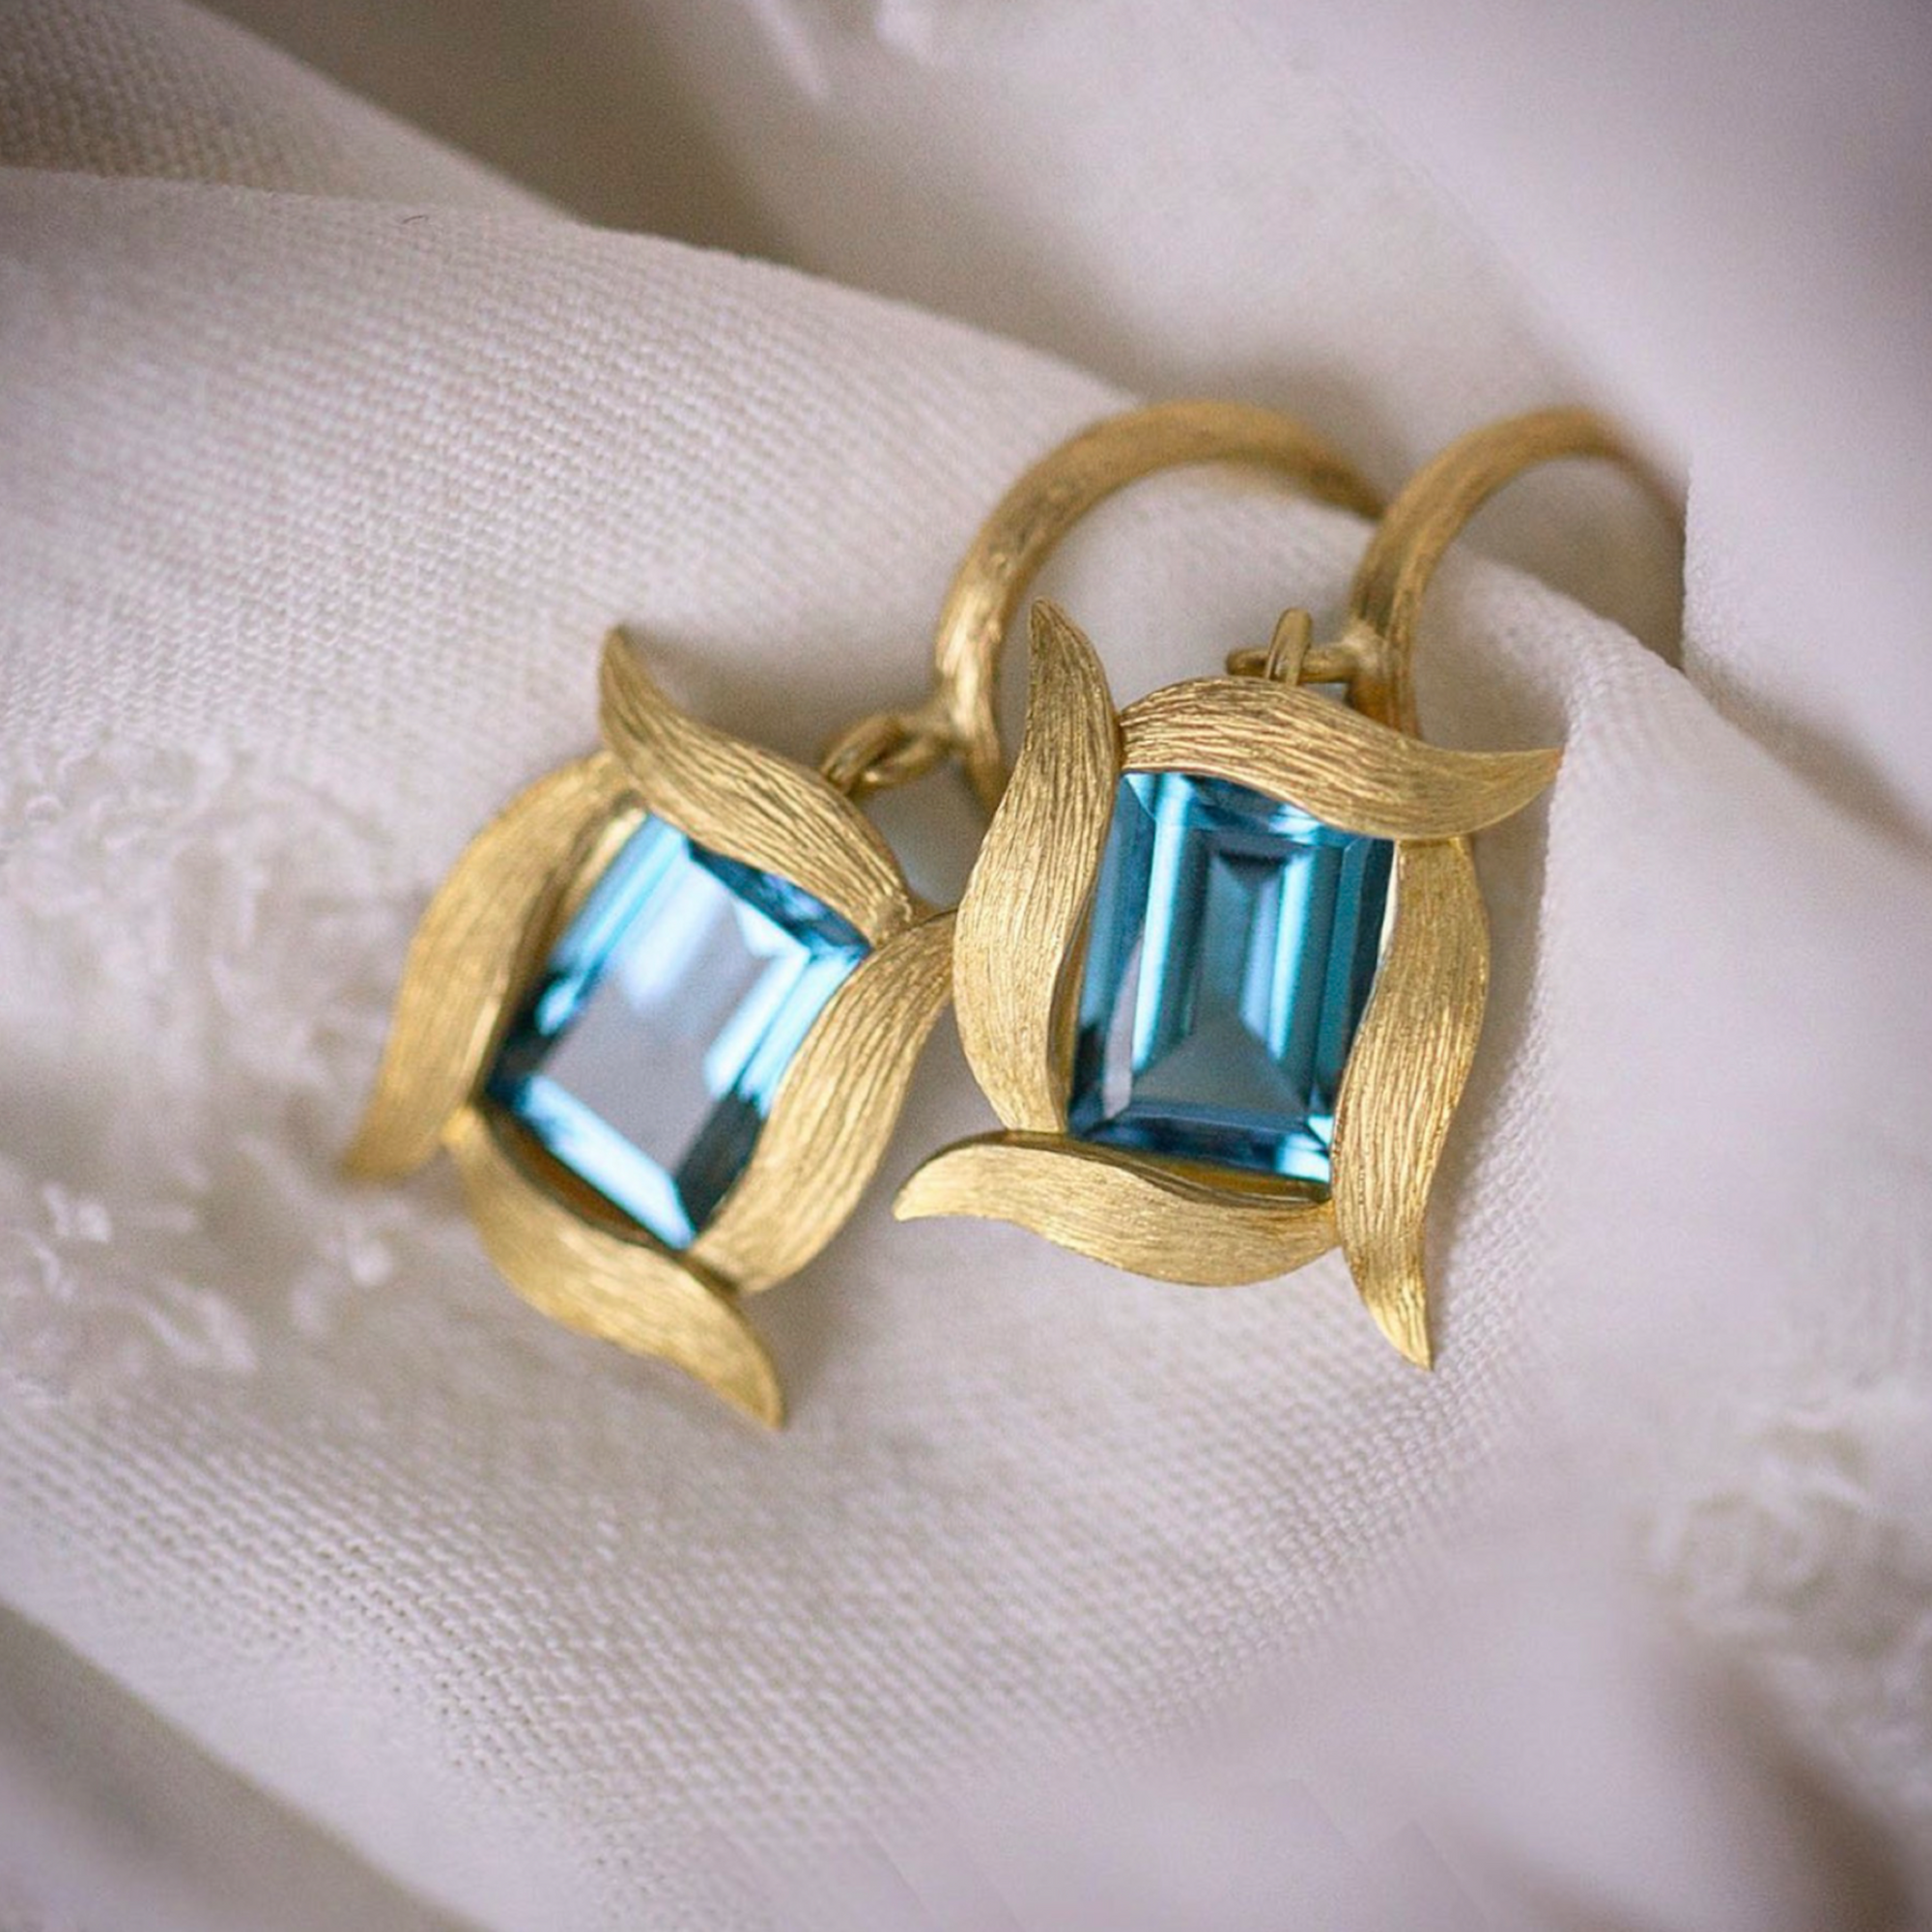 Blue Topaz Vine Hoop & Drop Earrings Laurie Kaiser available at Talisman Collection Fine Jewelers in El Dorado Hills, CA and online. Emerald cut London blue topaz stones framed by 18k yellow gold vines. The elegant and understated design adds a touch of sophistication to any look, while the small hoop makes them comfortable to wear all day.